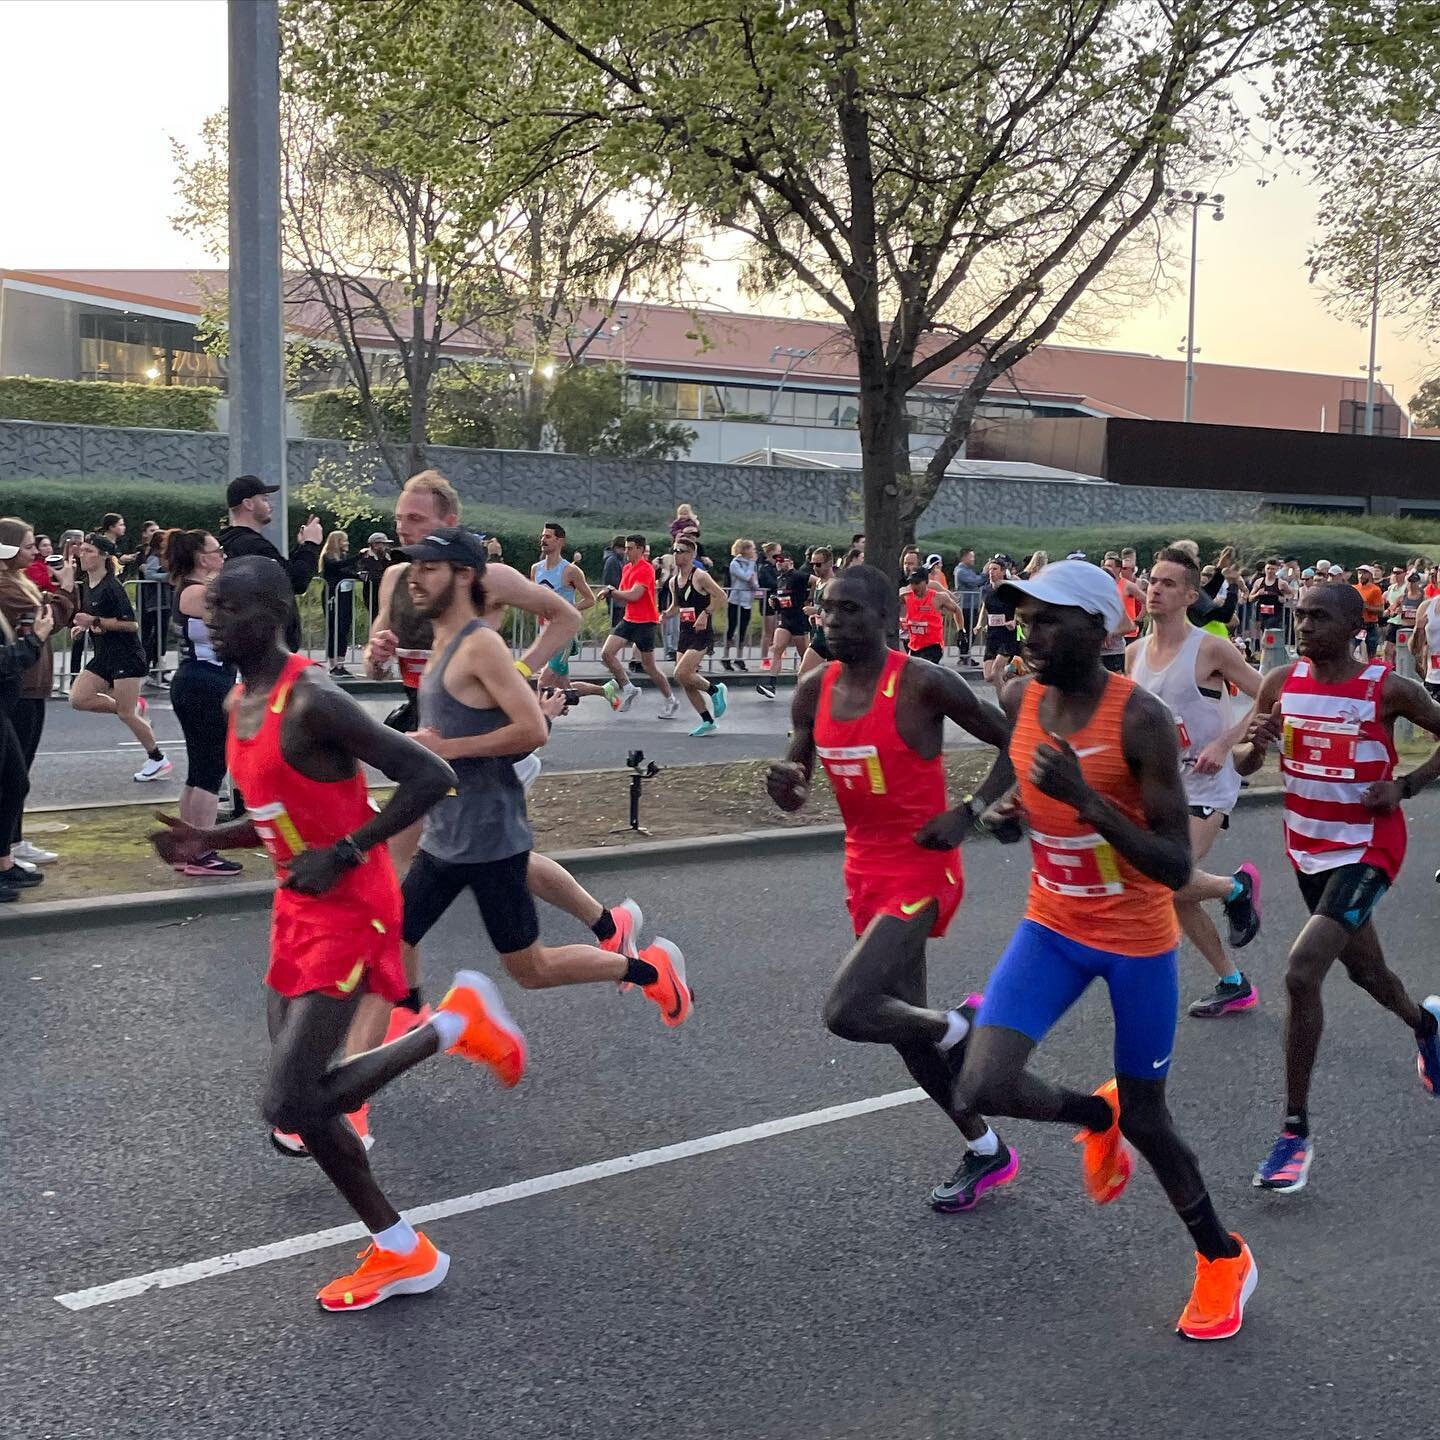 Incredible day out today @melbmara with heaps of PBs and plenty of running love and support! We&rsquo;re all winners today🏃&zwj;♀️🏃&zwj;♂️😁💚#melbmara #vigorcoaching #marathon #roadrunning #vigorrunning #ernioldrunning #runningcommunity